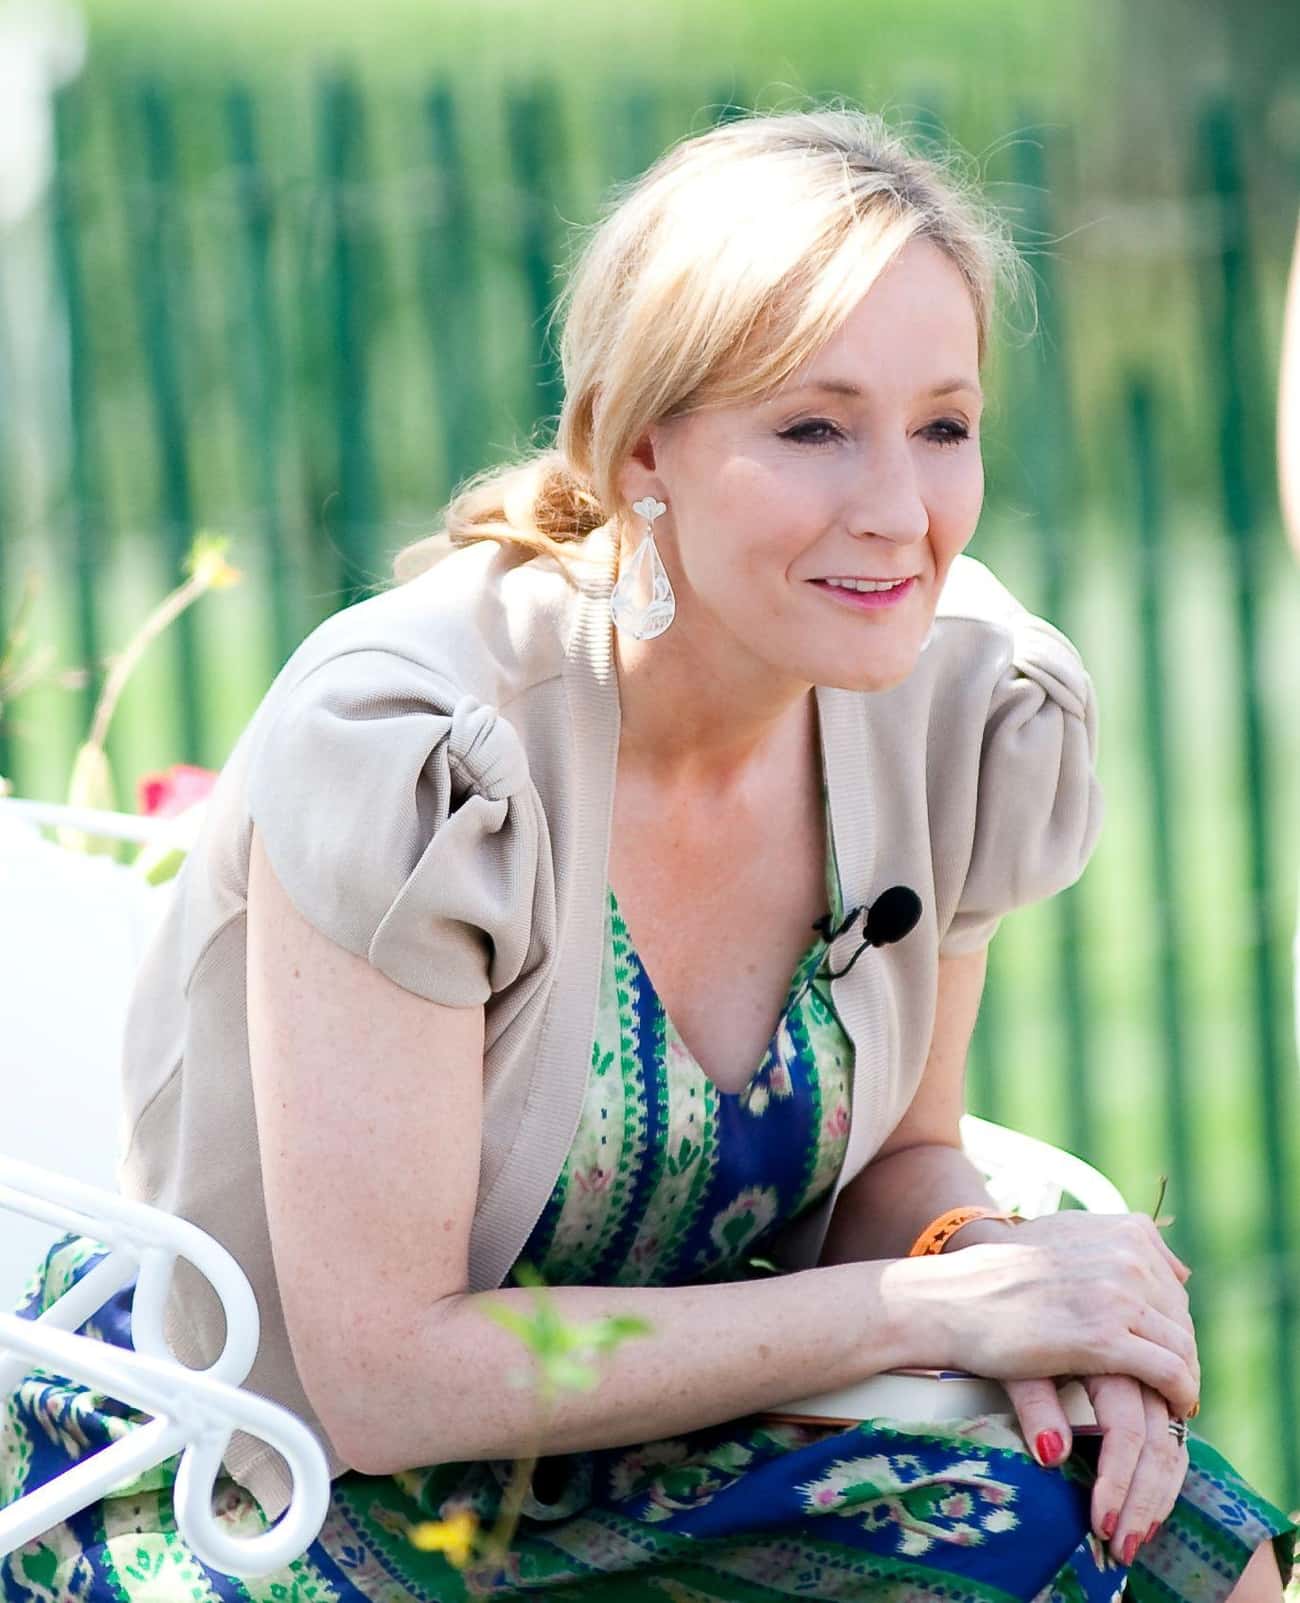 J.K. Rowling&#39;s Relatives Are Chill About Her Writing Career